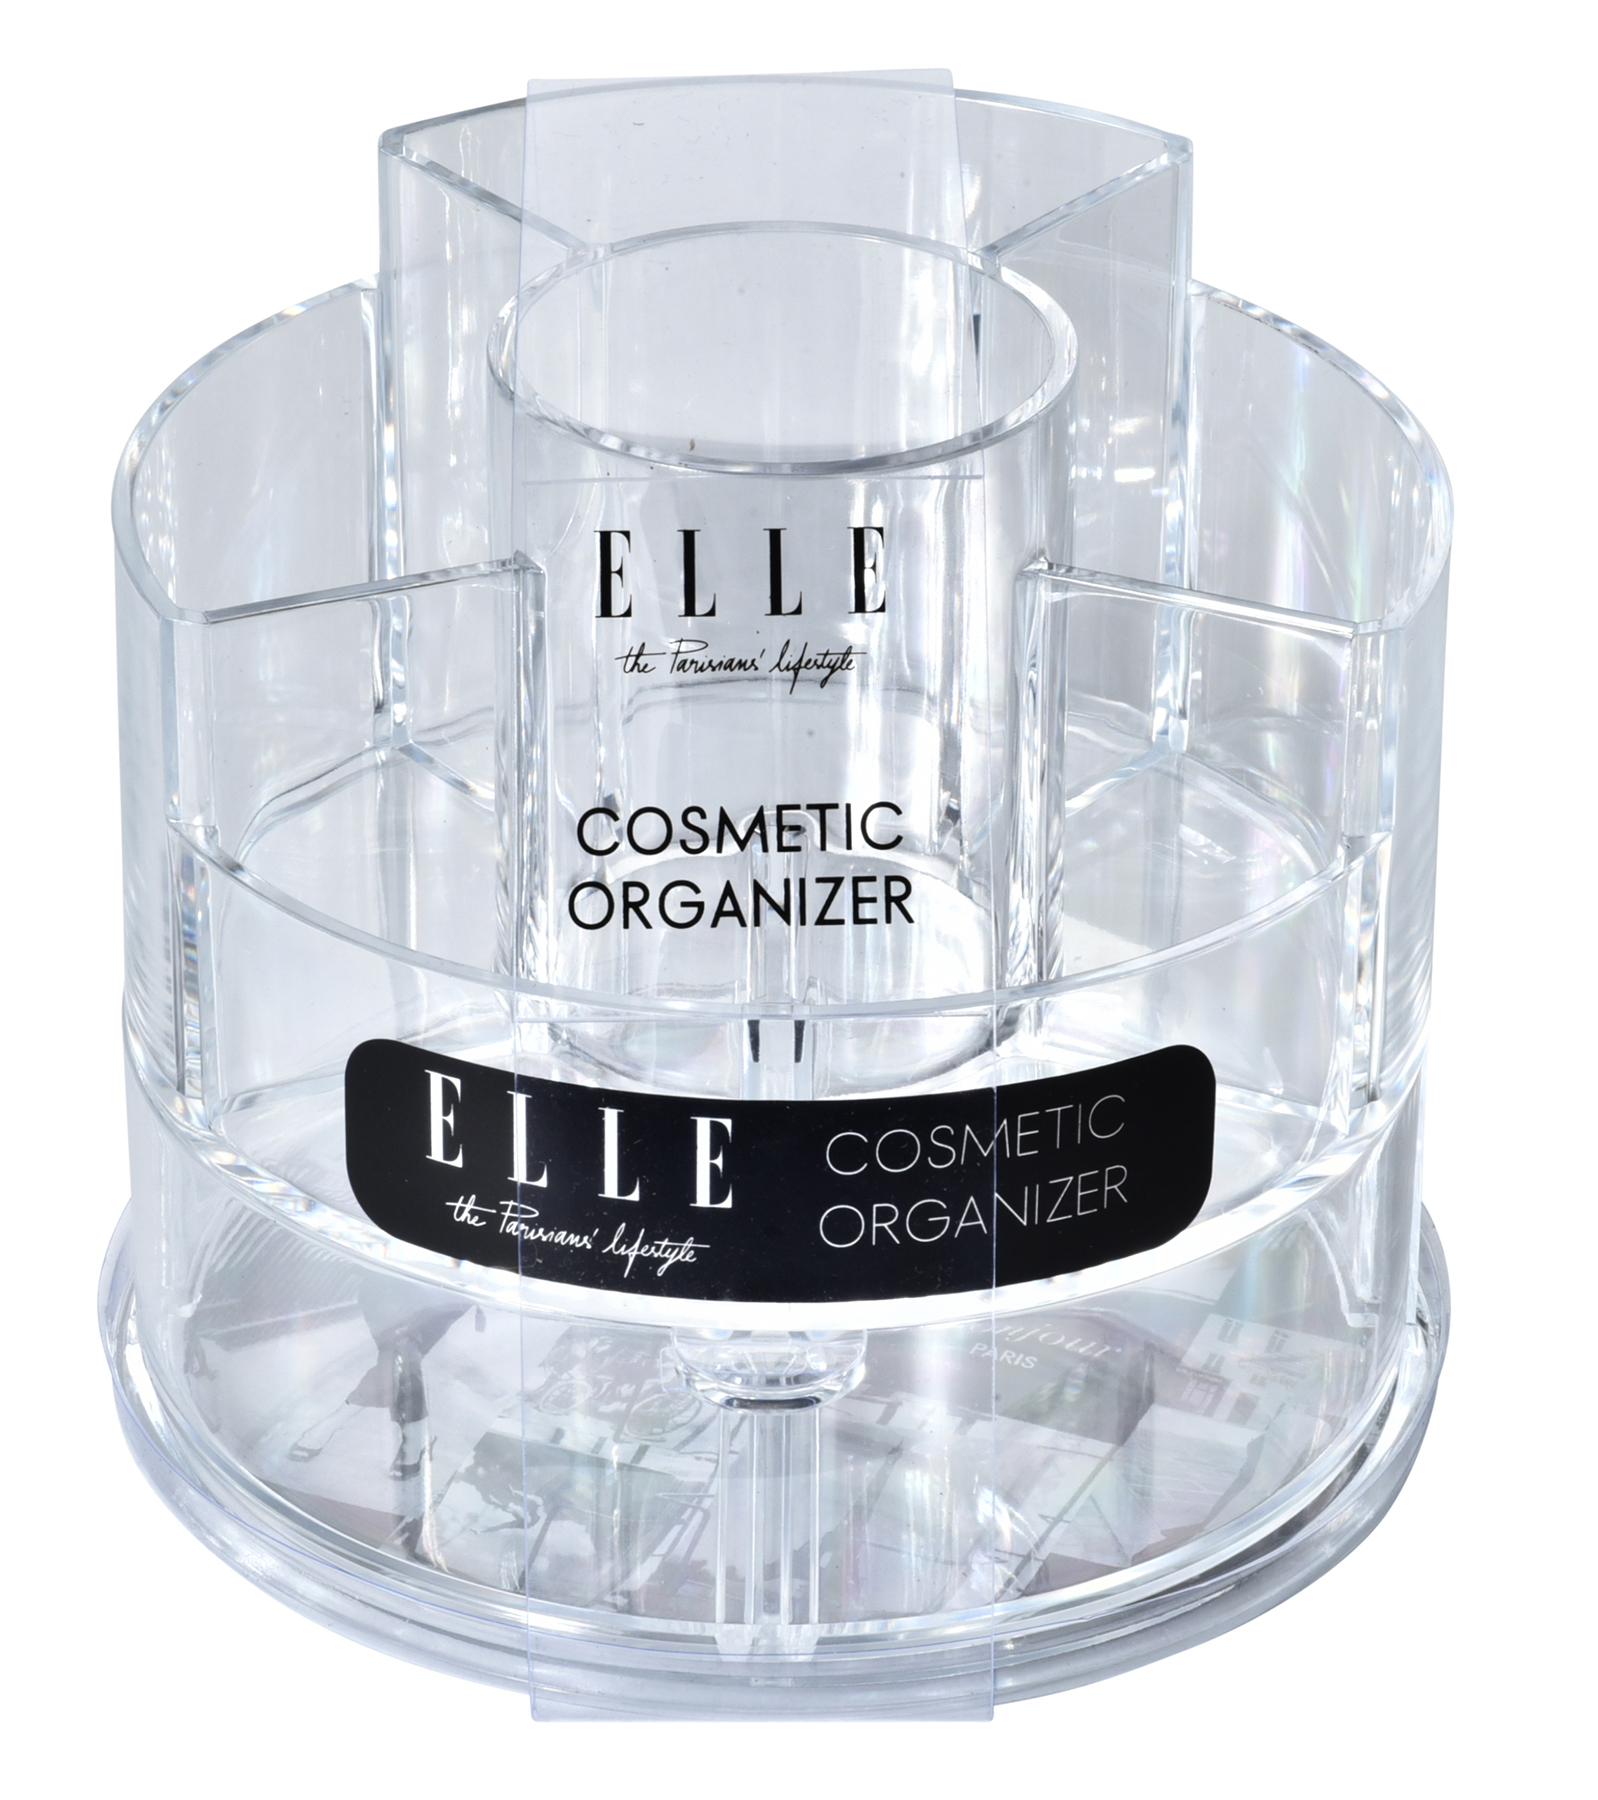 ELLE The Parisians Lifestyle Collection Clear Round Acrylic Cosmetic Organizers